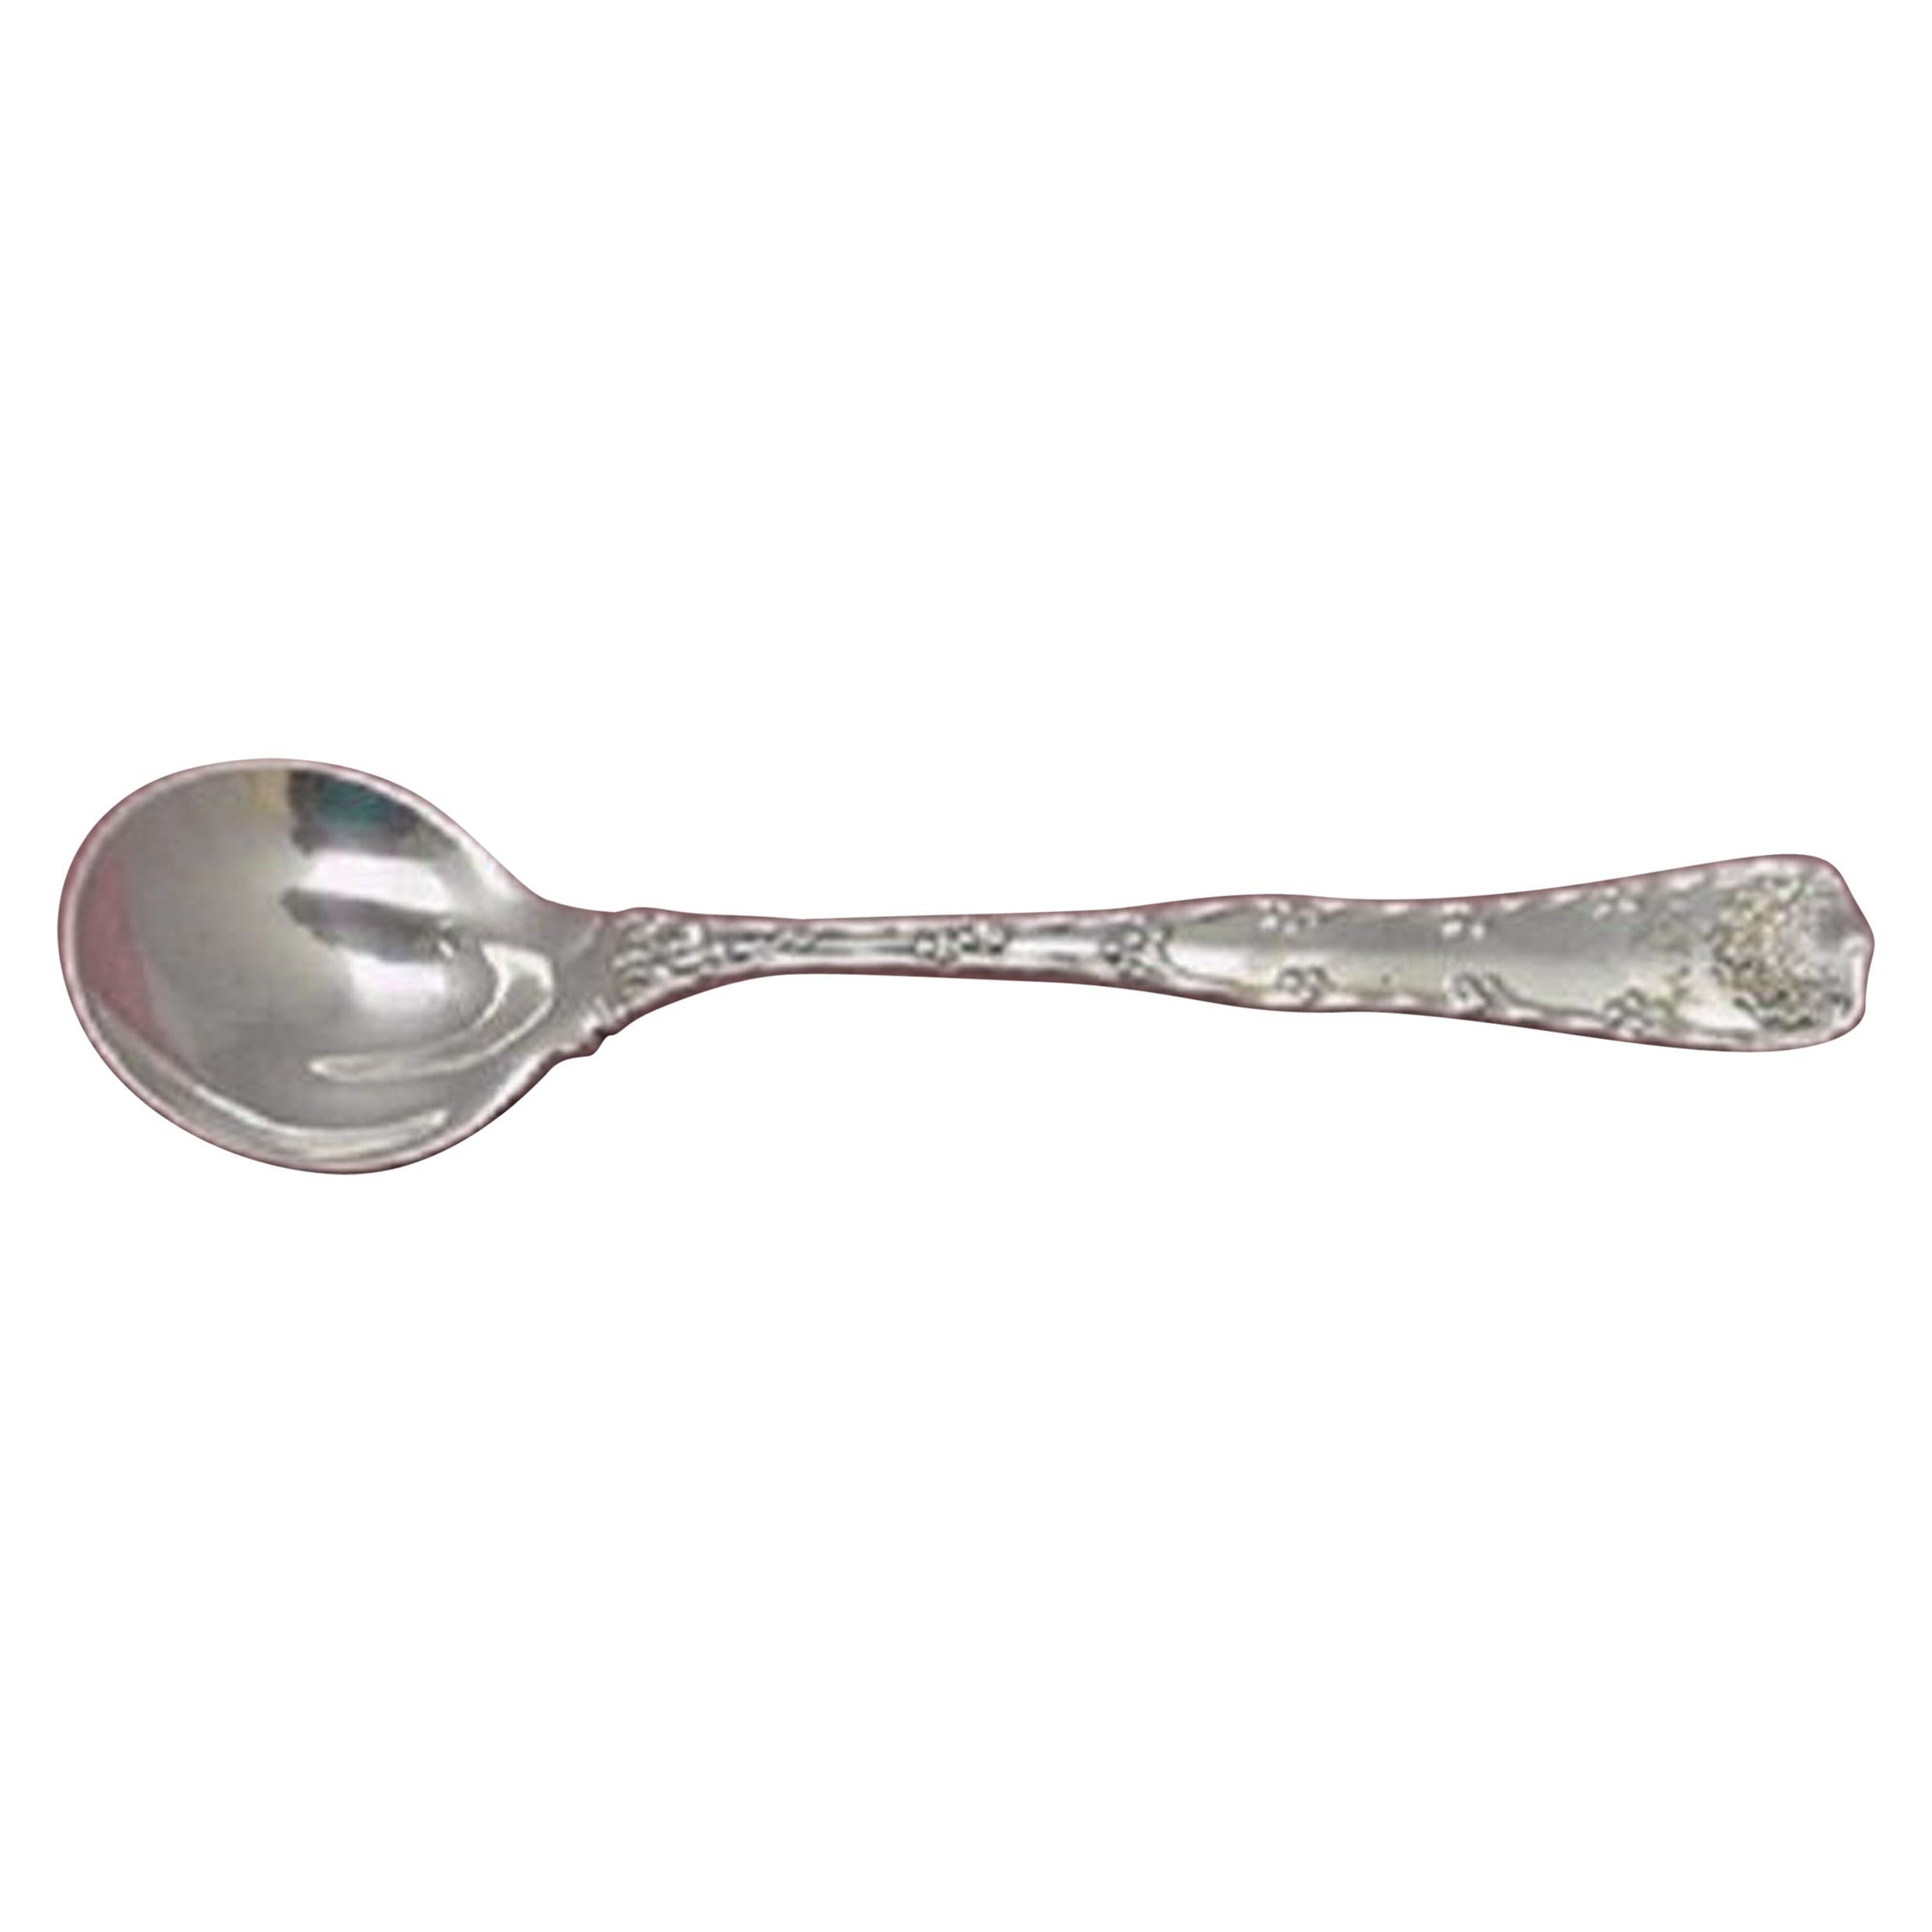 Floral by Wallace Plate Silverplate GW Demitasse Spoon 4 1/4" 